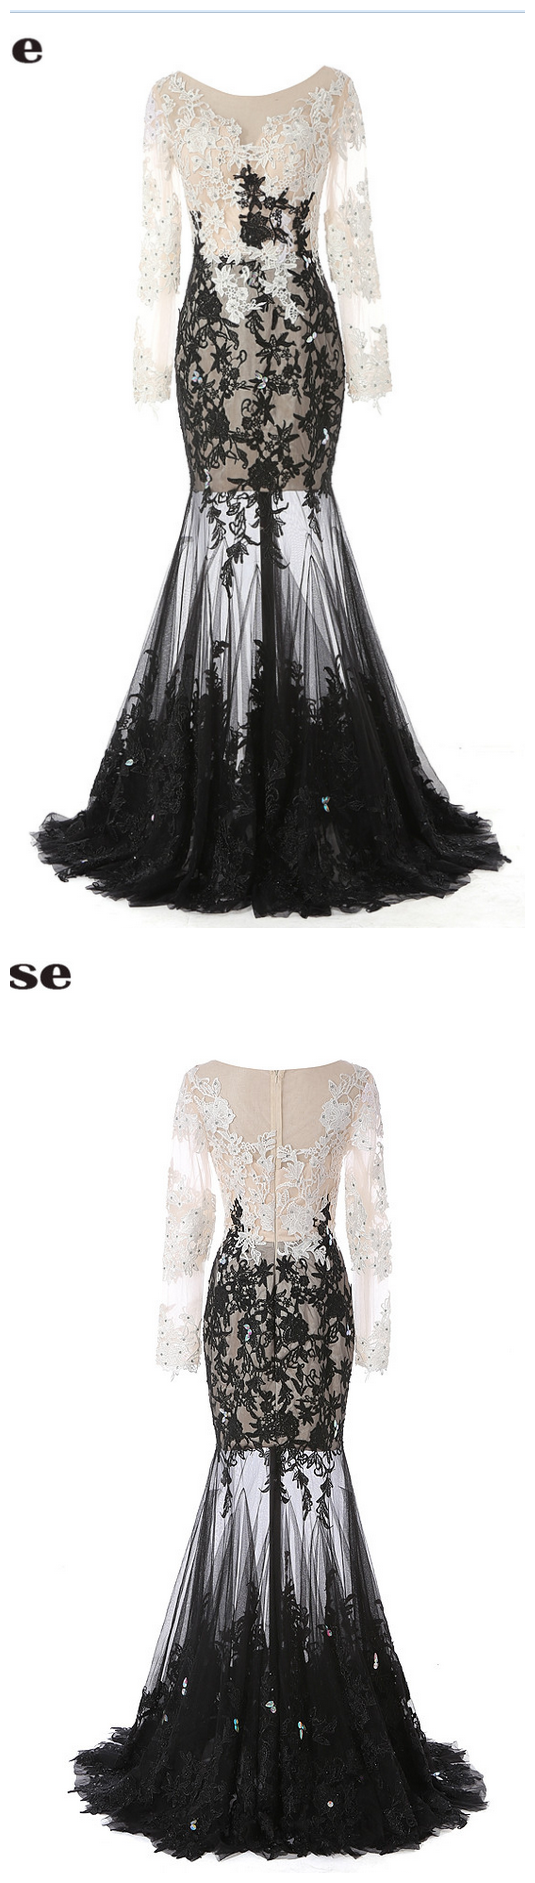 Black Skirt Appliques Beaded Evening Dresses ,sexy Long Sleeves Prom Party Gown